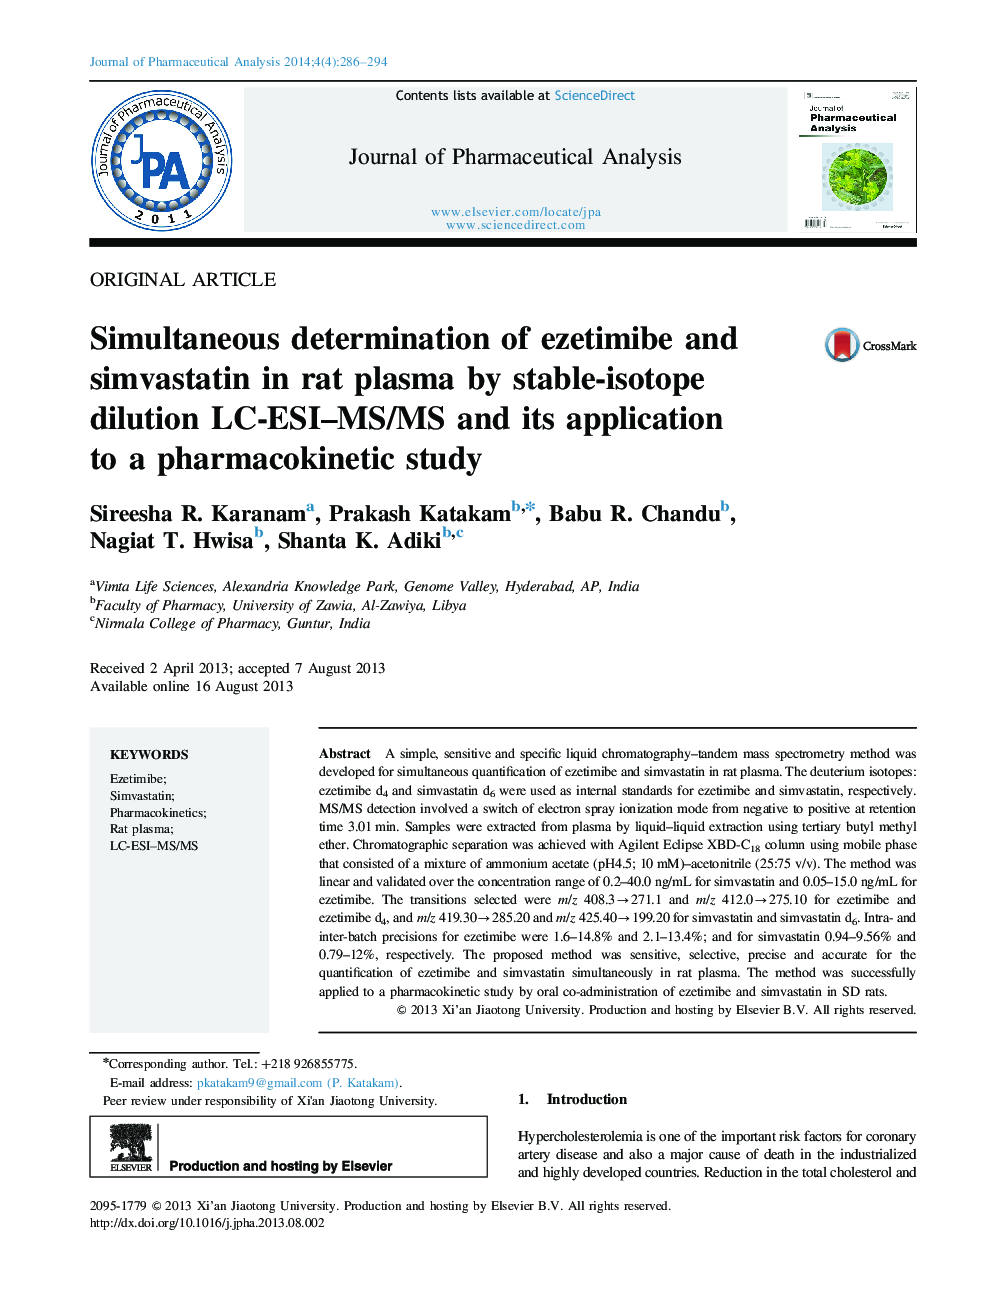 Simultaneous determination of ezetimibe and simvastatin in rat plasma by stable-isotope dilution LC-ESI–MS/MS and its application to a pharmacokinetic study 